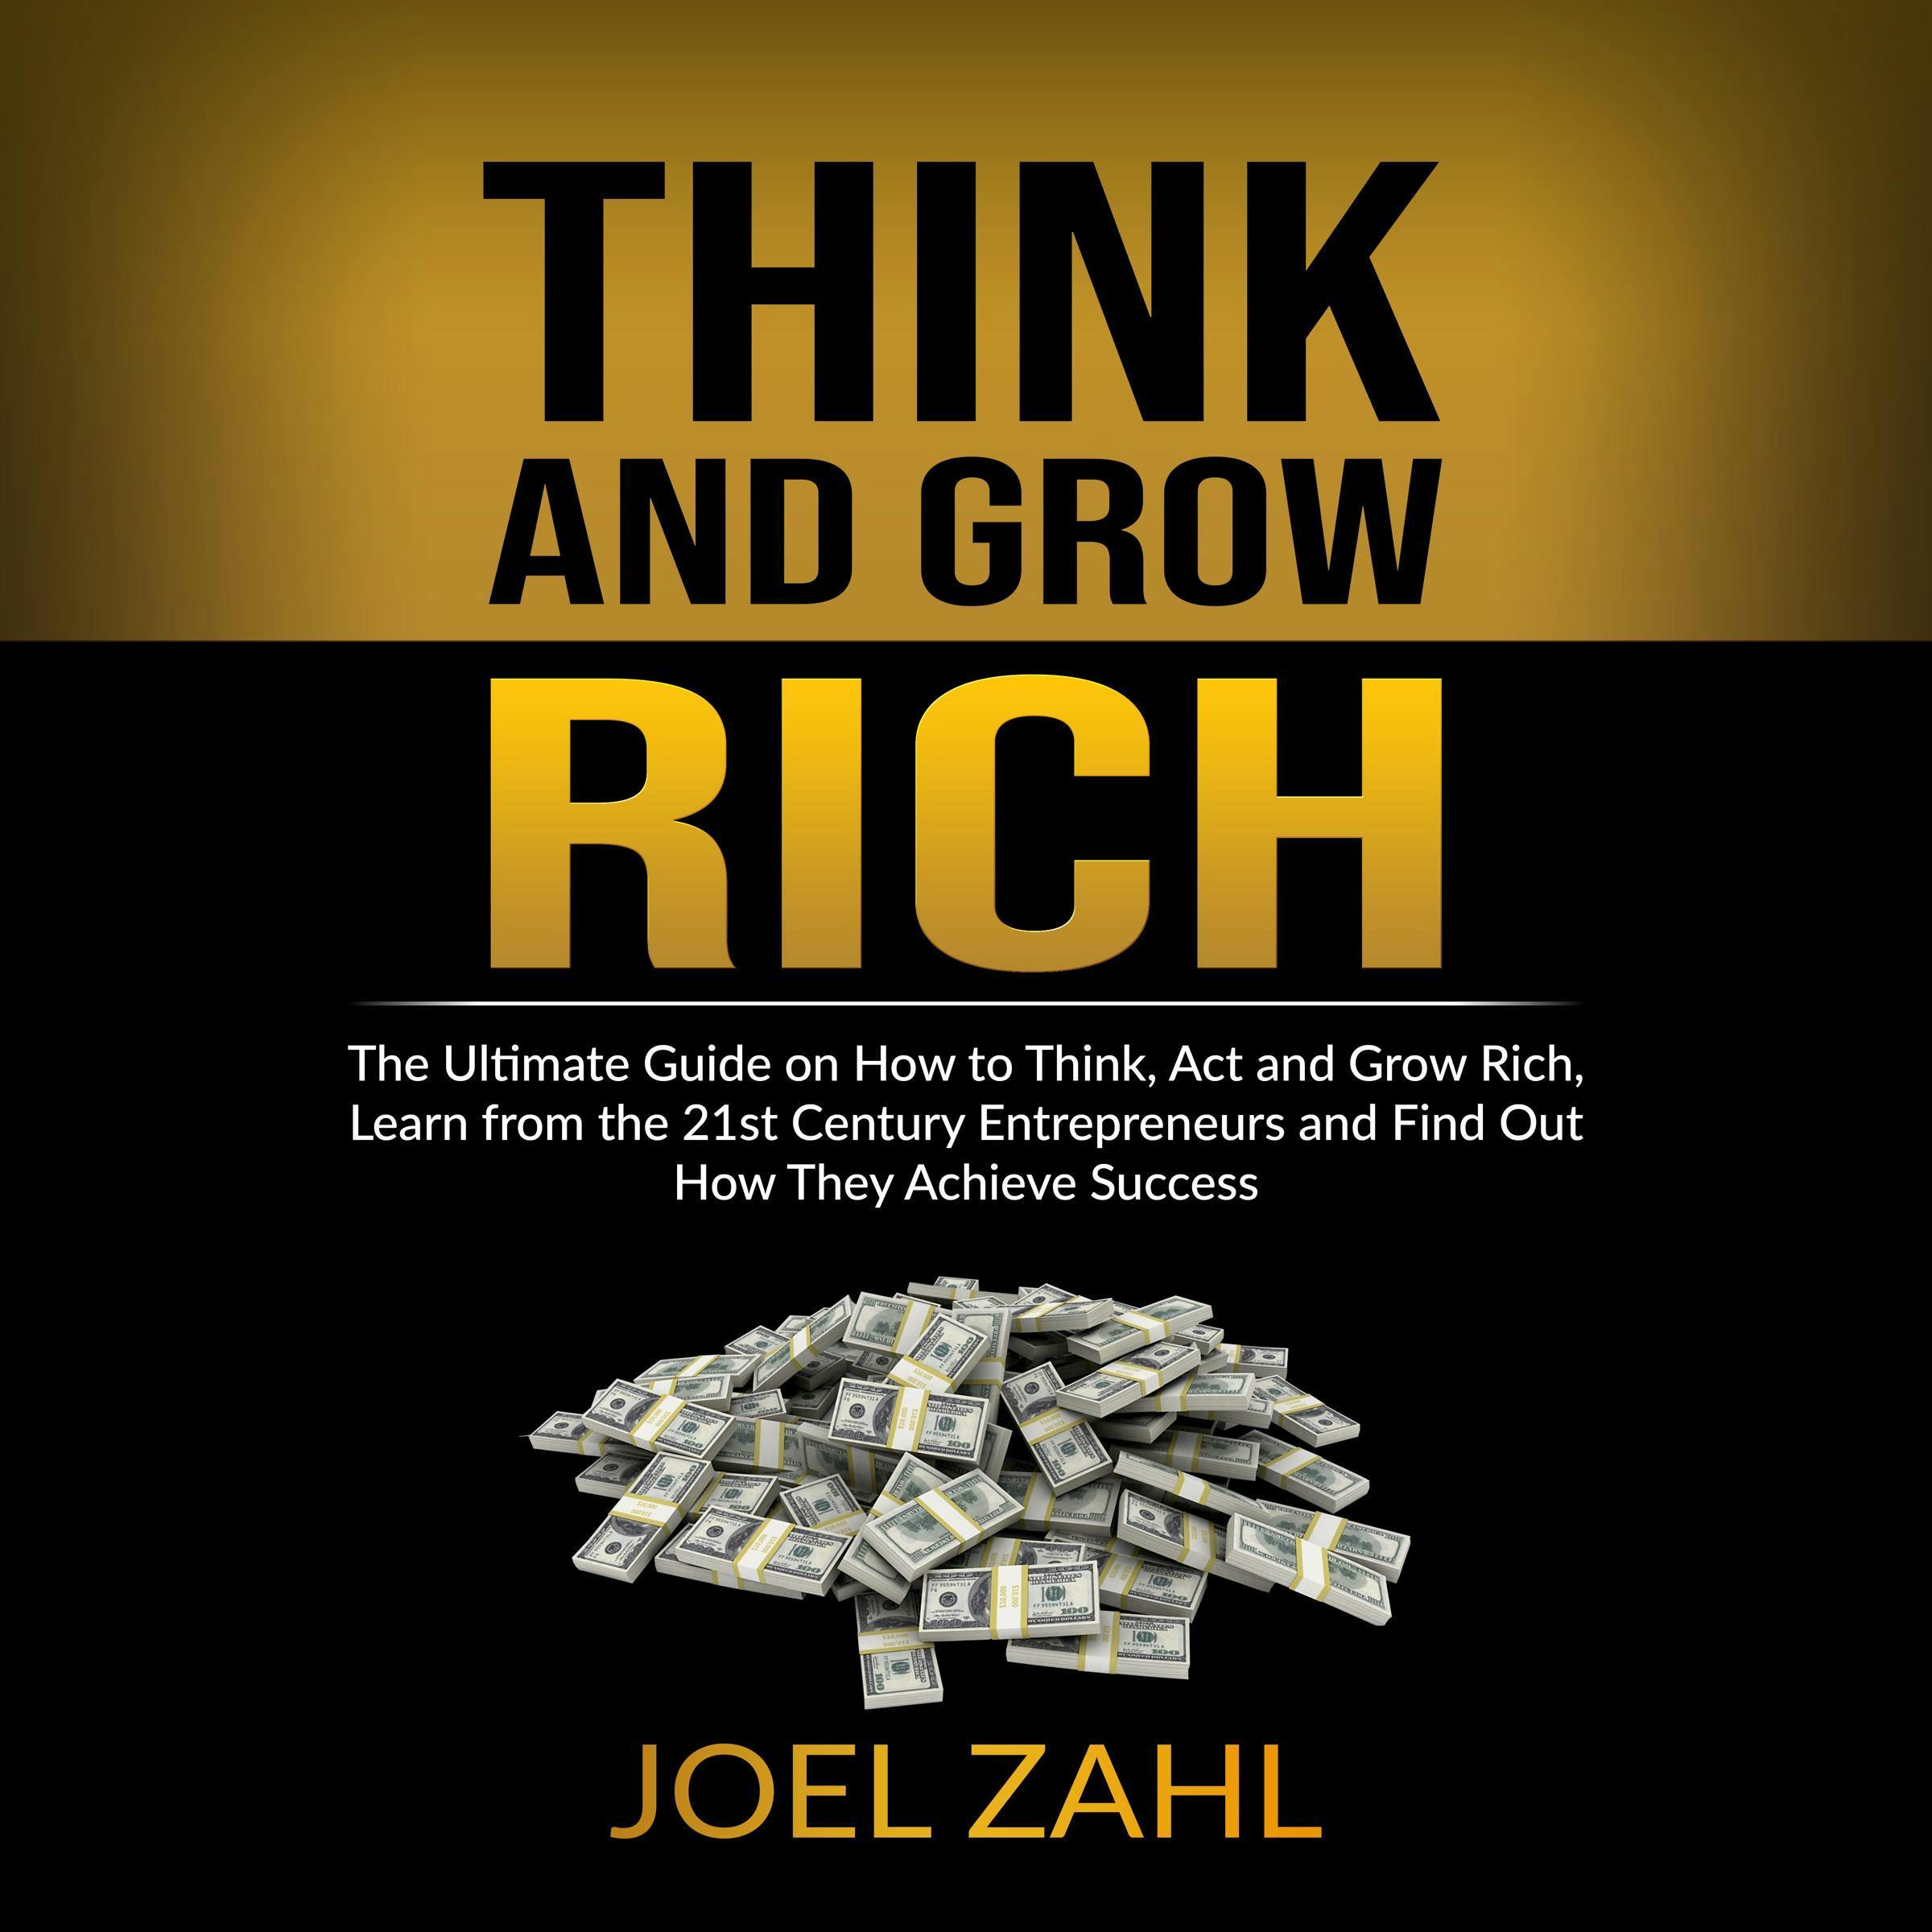 Think and Grow Rich: The Ultimate Guide on How to Think, Act and Grow Rich, Learn from the 21st Century Entrepreneurs and Find Out How They Achieve Success - ???Joel Zahl.?????